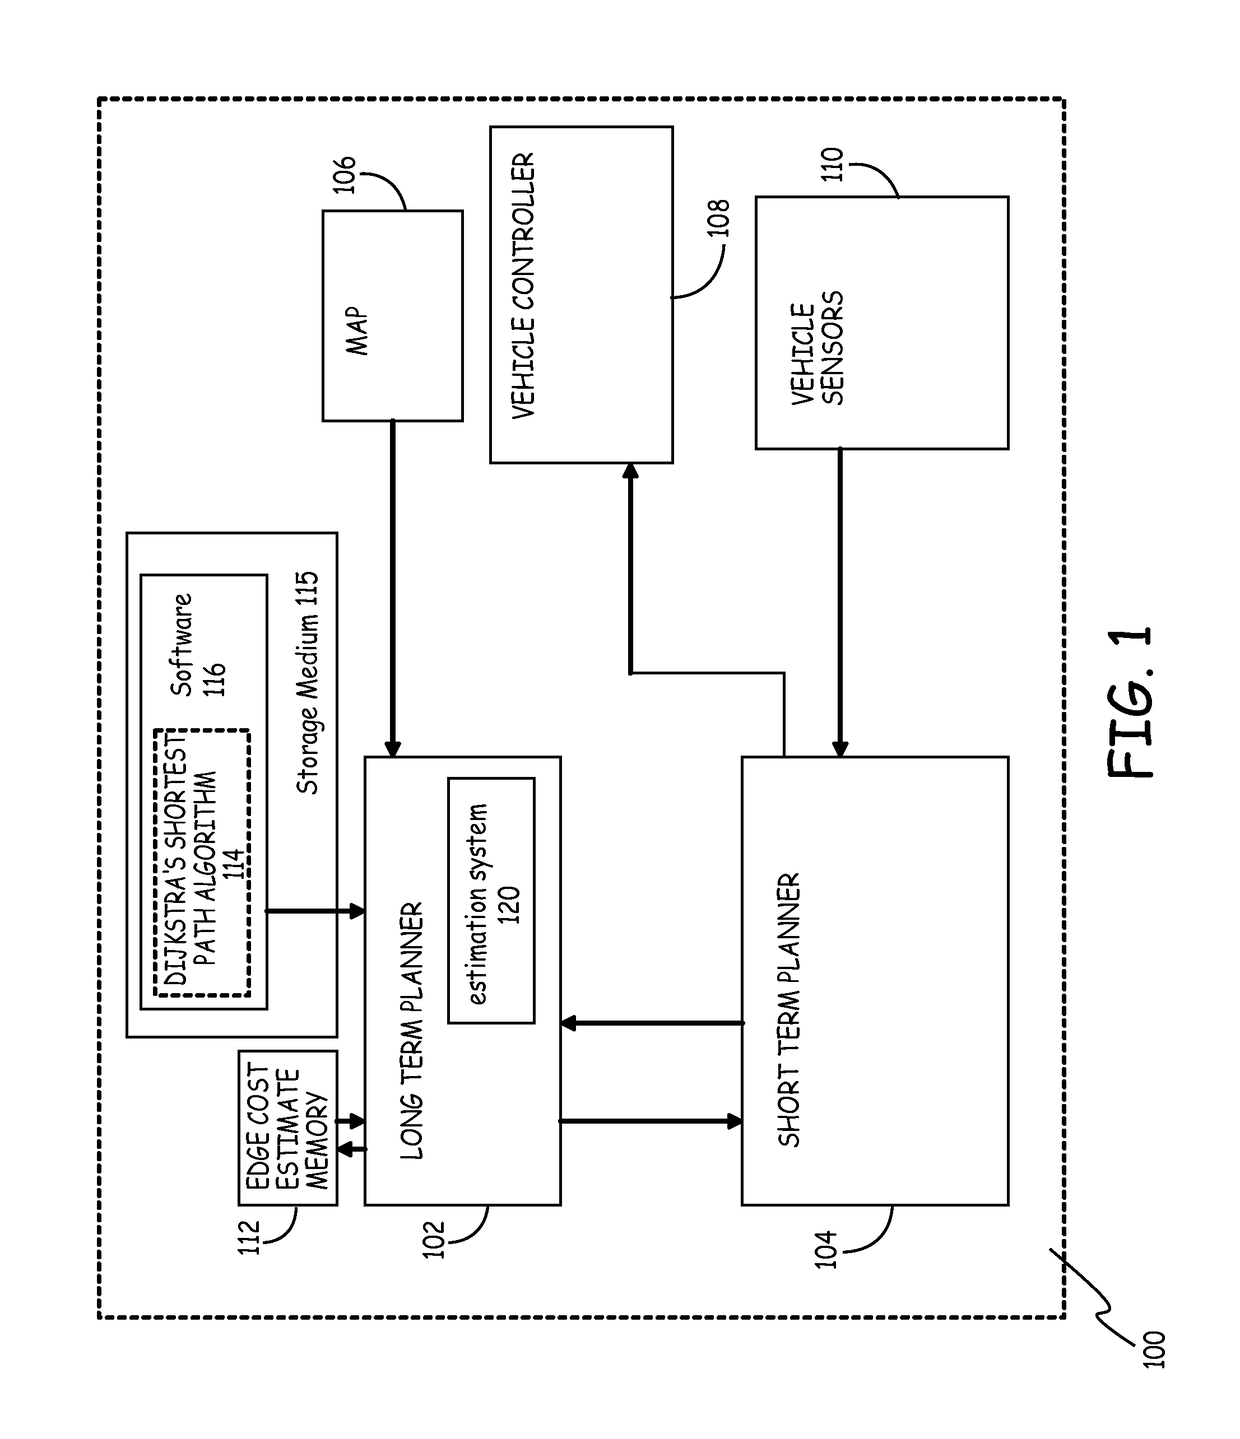 System for integrating dynamically observed and static information for route planning in a graph based planner